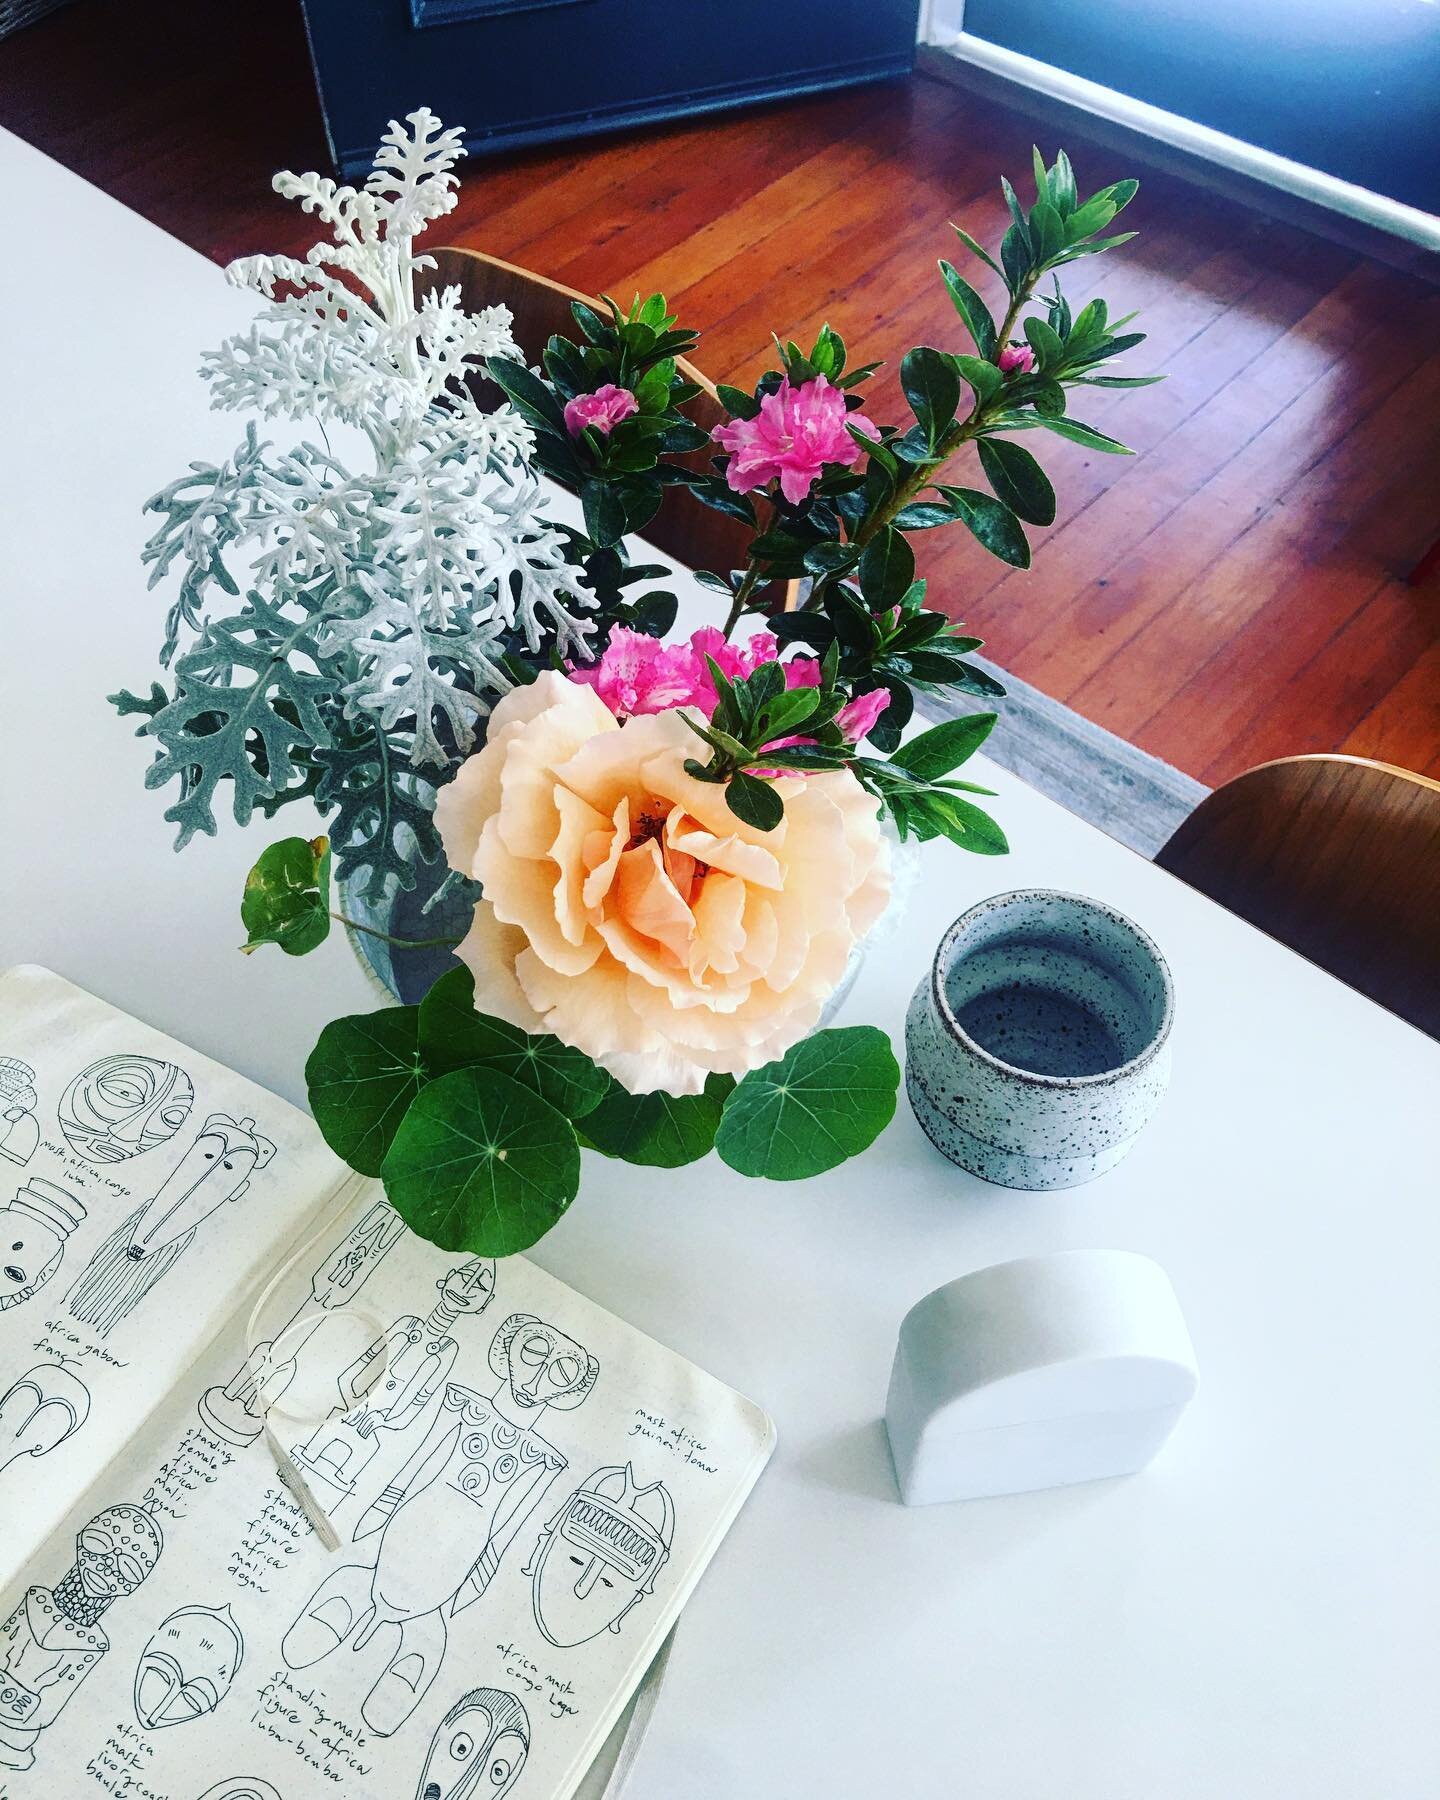 Some Saturday sketching, this time on African Art, flower arranging from the garden and lots of coffee, Ideal weekend for a home body! #studiomarcushay #smhinc #sketching #africanart #ikebana #flowerarranging #saturday #lagunabeach #california